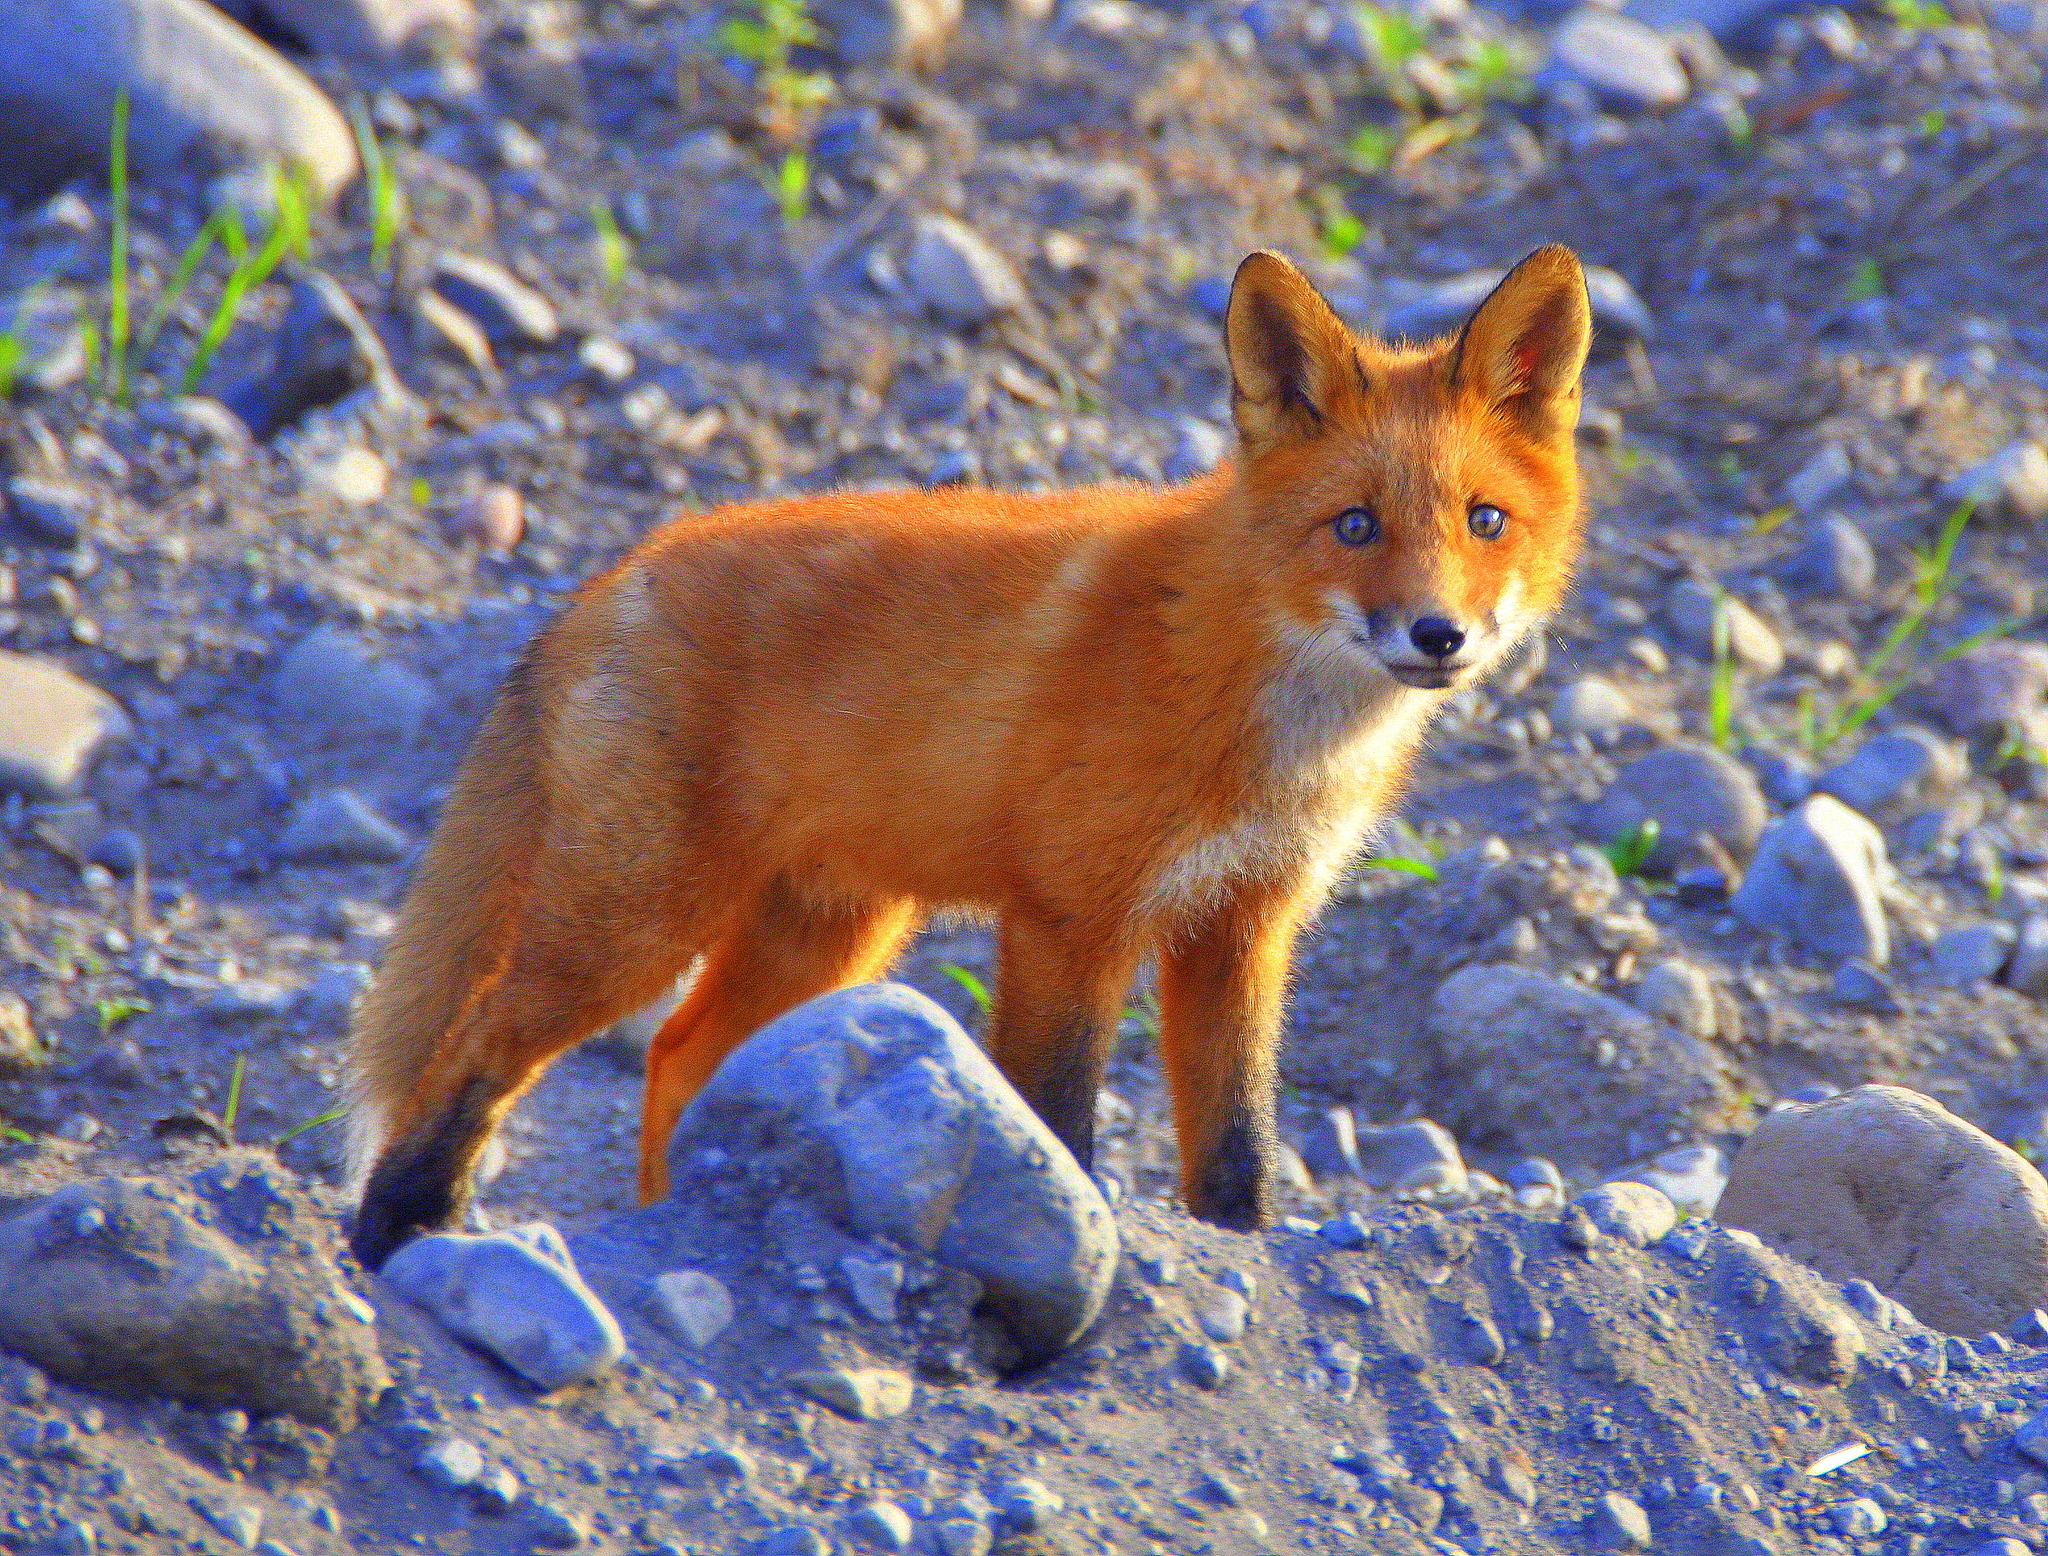 On the street everything is gray and white, but I want fire - Kamchatka, Tourism, Ust-Kamchatsk, Fox, Wild animals